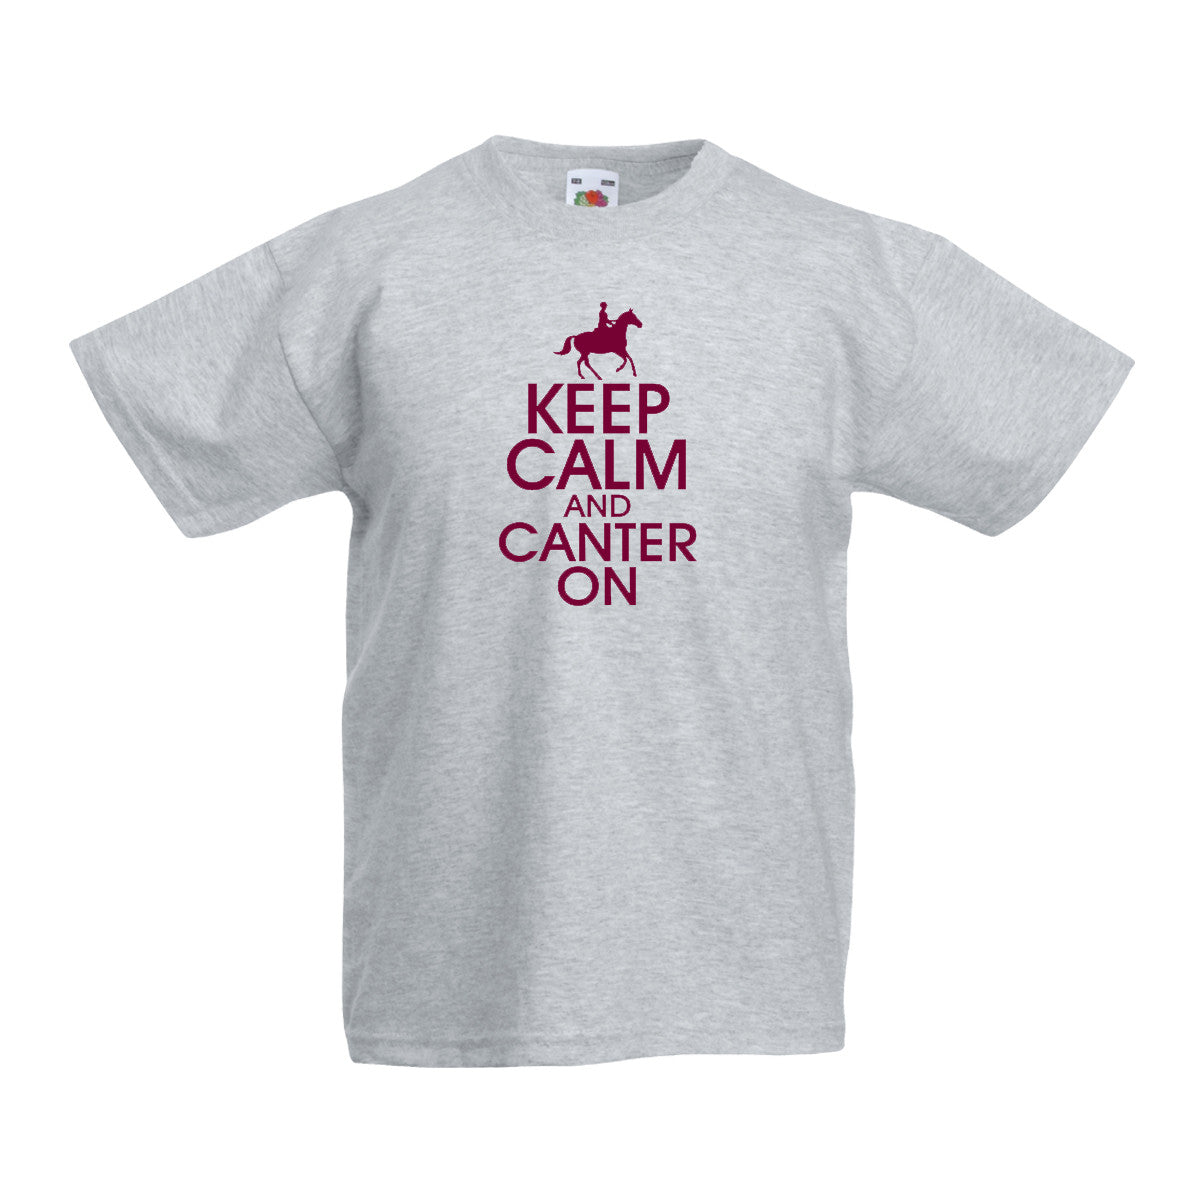 Keep Calm And Canter On